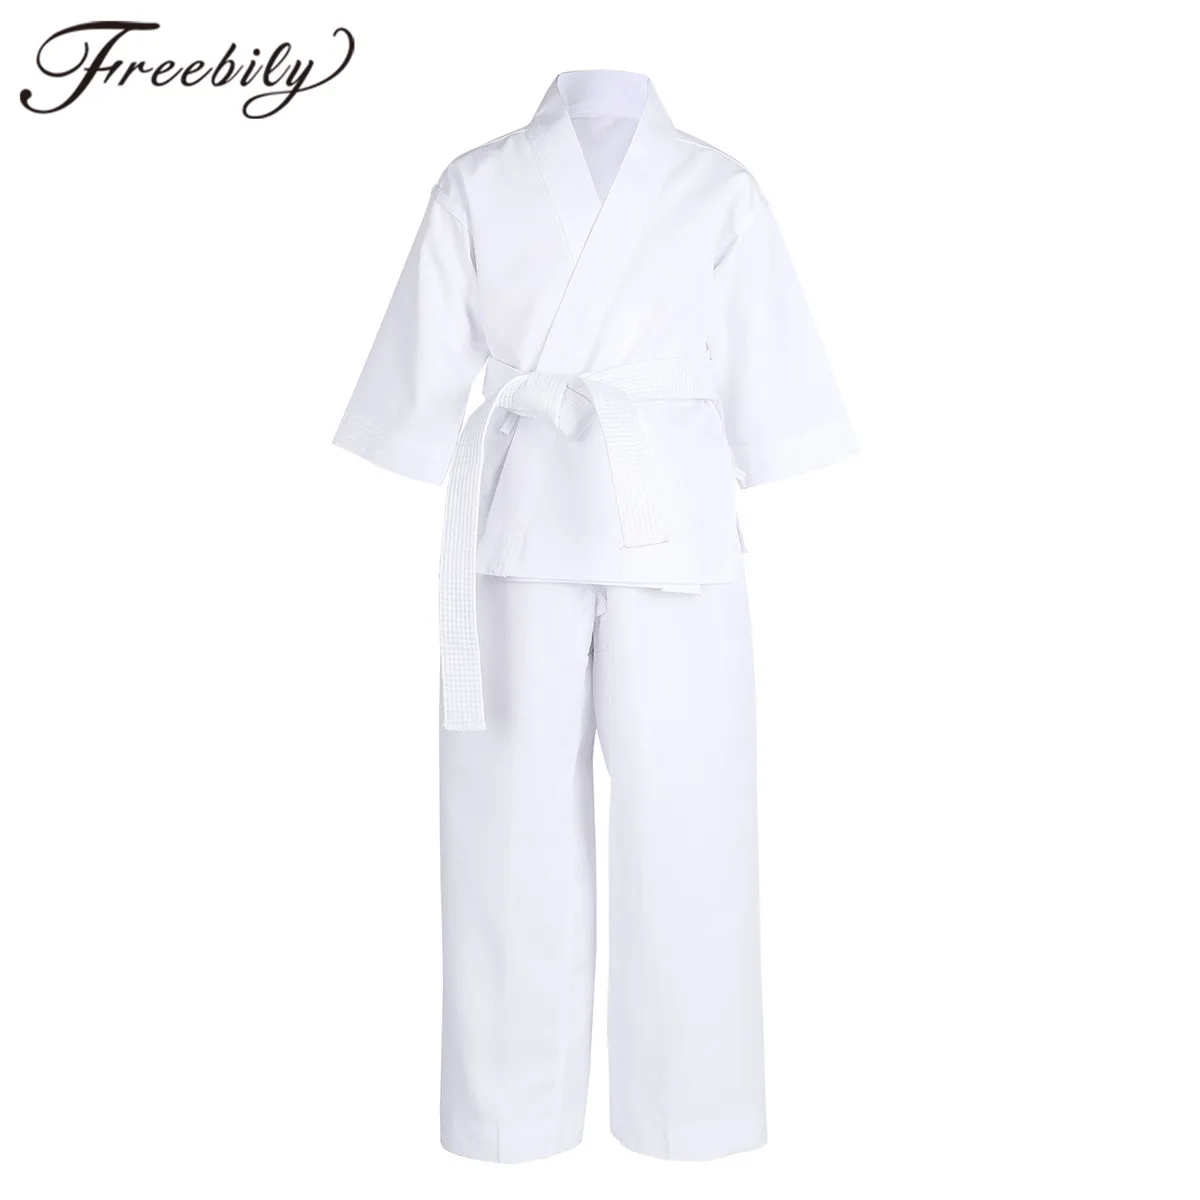 Details about   Karate Gi Suit Uniform For Kids Adults White  Boys Girls Mens New FREE BELT 